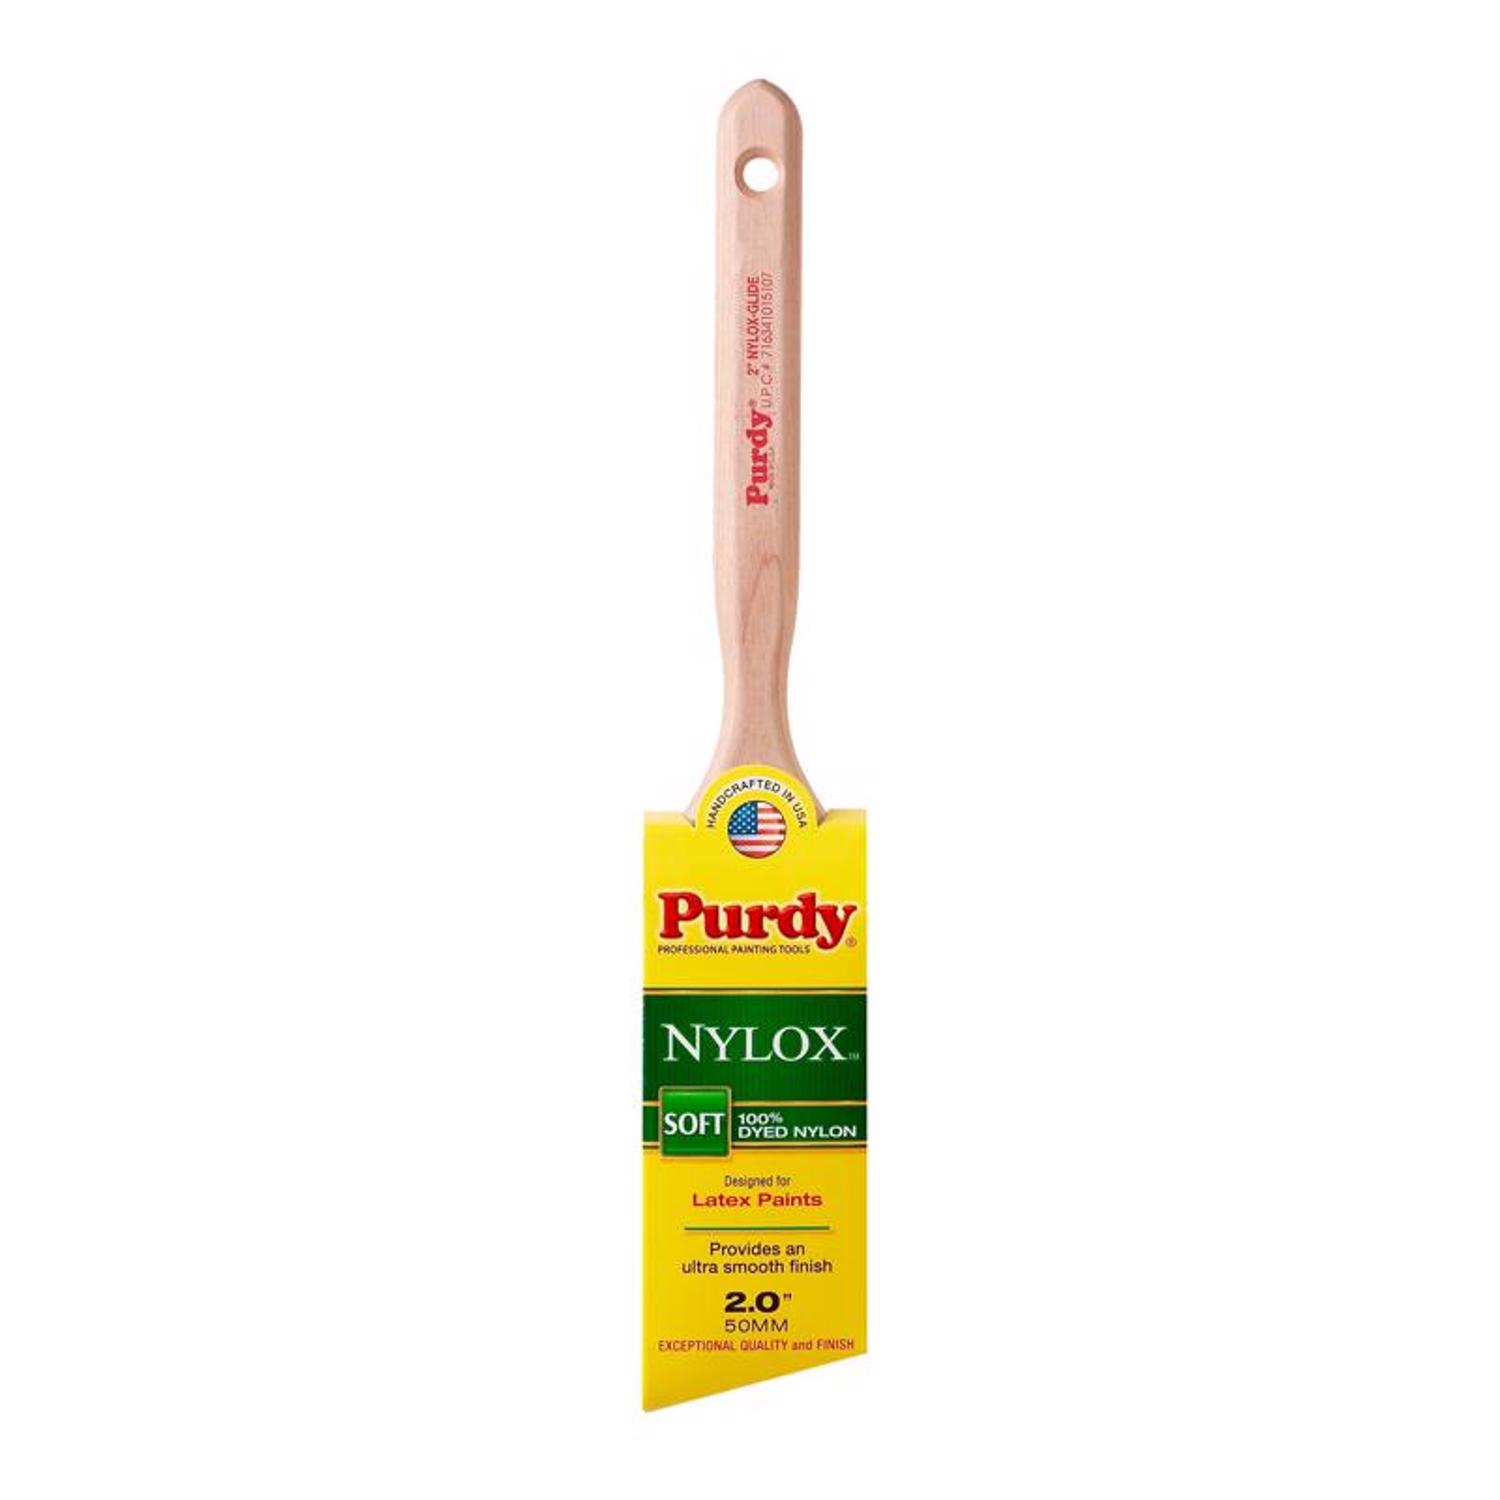 Photos - Putty Knife / Painting Tool Purdy Nylox Glide 2 in. Soft Angle Trim Paint Brush 144152220